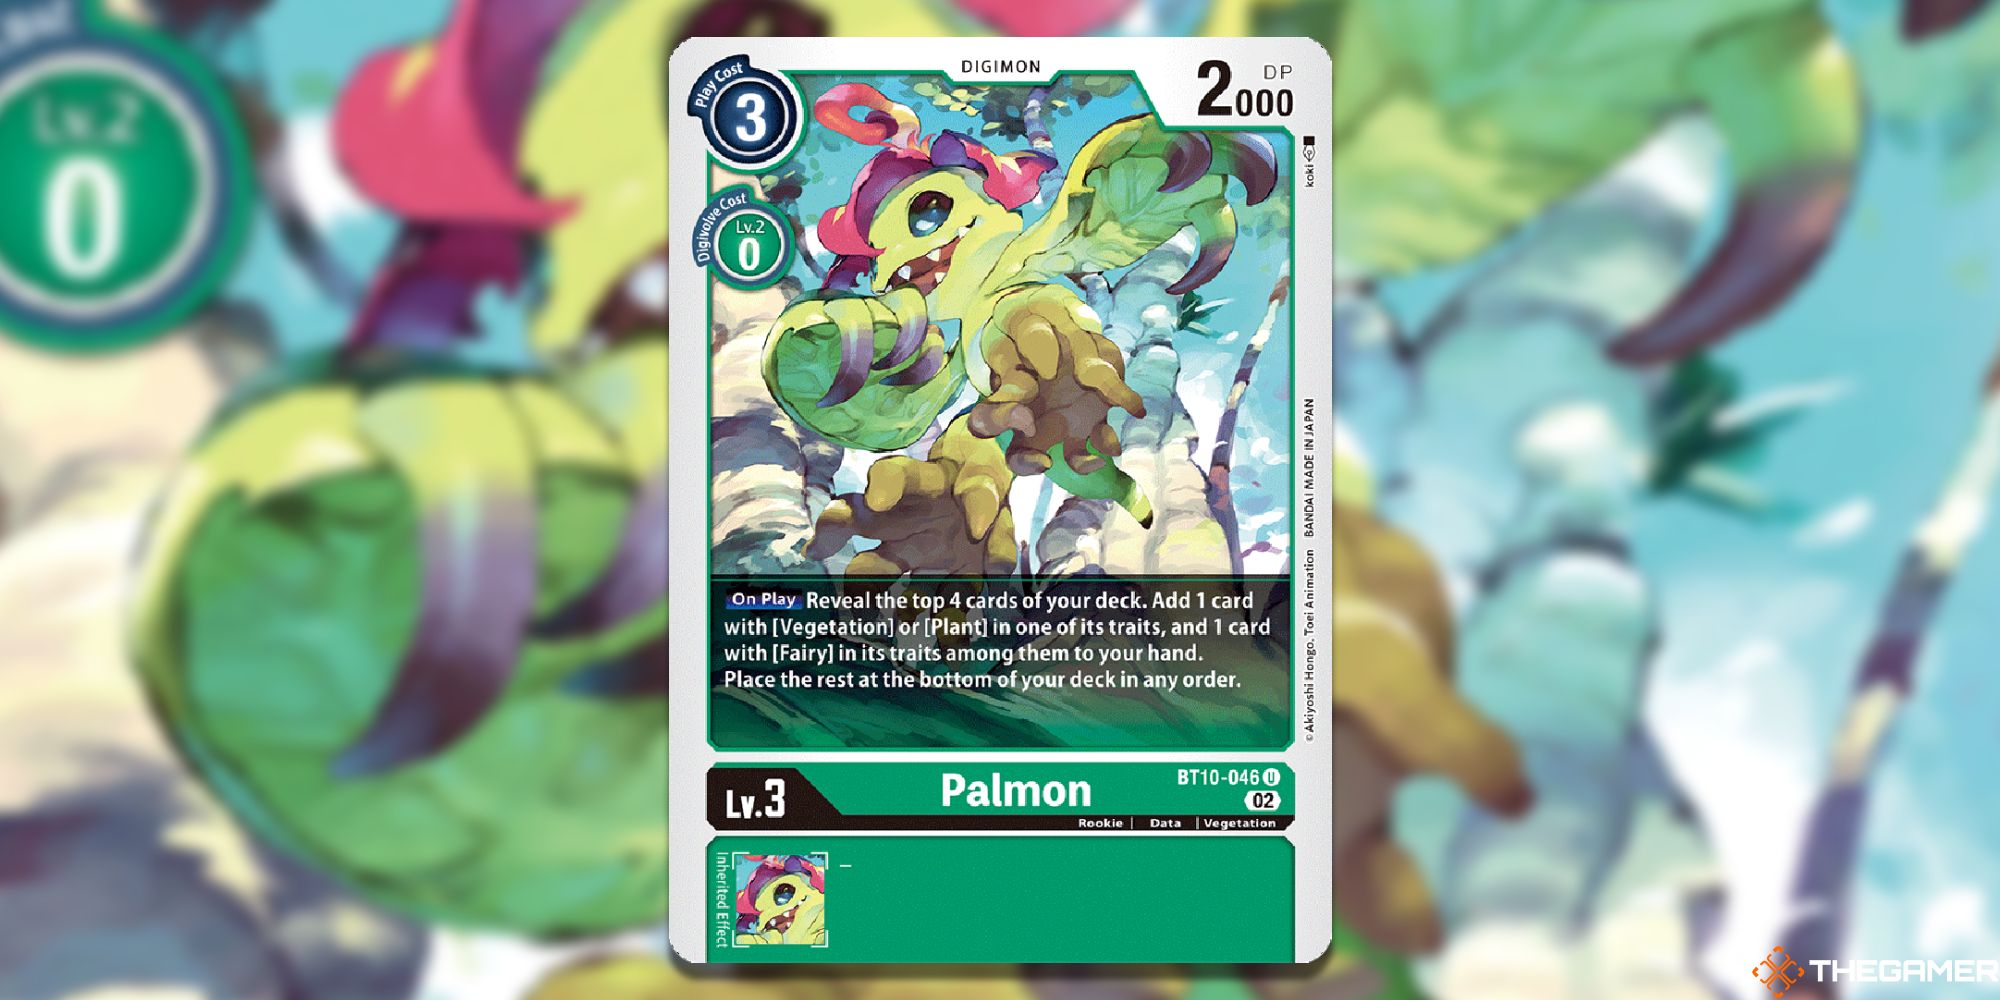 palmon bt10 image with blurred background digimon card game